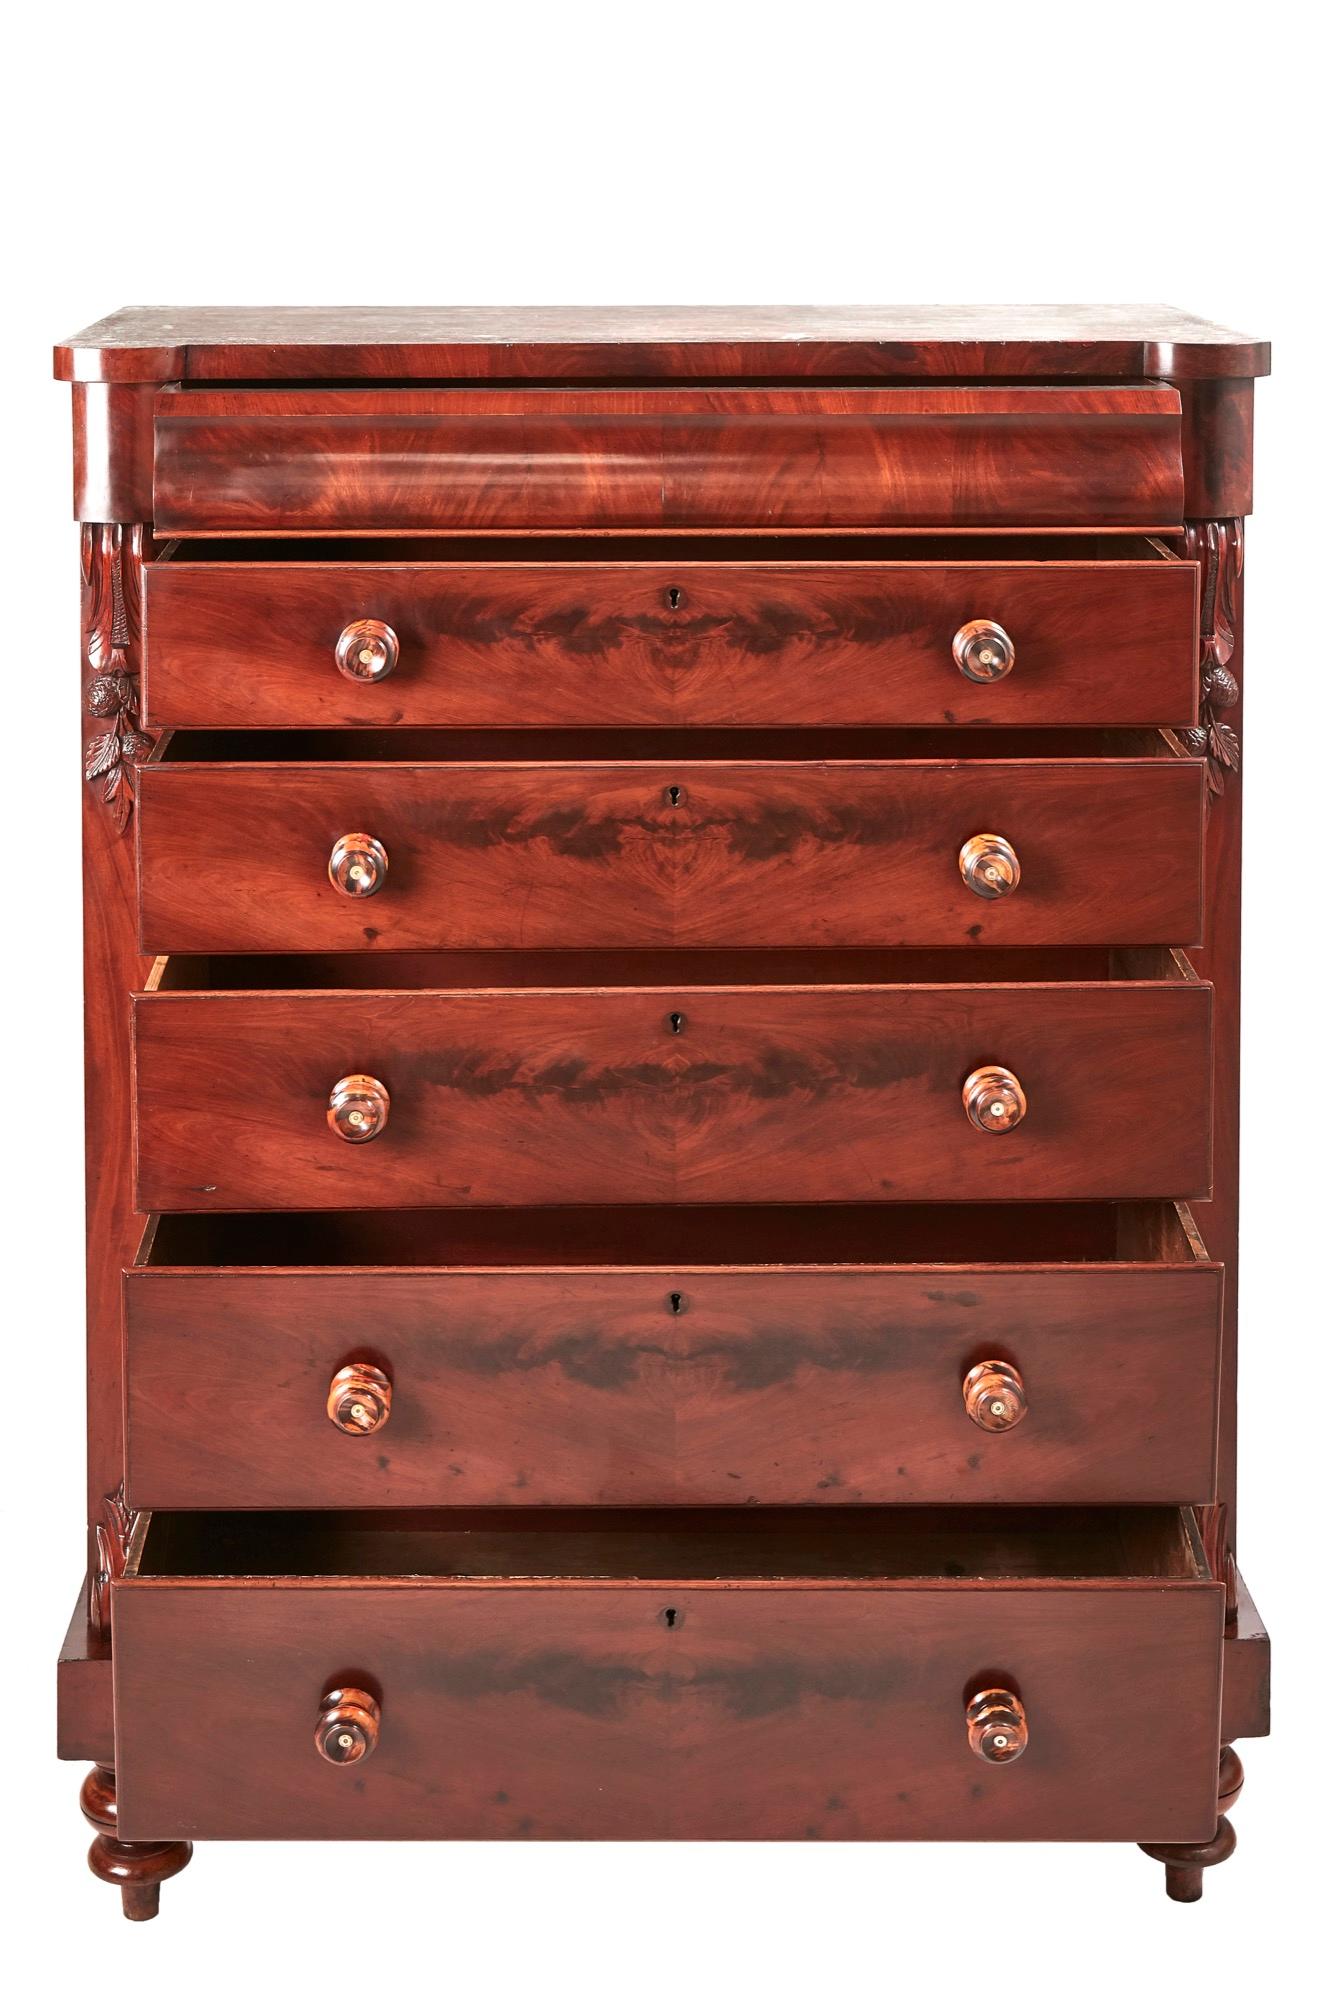 Quality Tall Victorian mahogany chest of drawers, having six long mahogany drawers with original turned knobs, lovely carved mahogany supports, standing on a plinth base with turned feet
Lovely color and condition
Measures: 48